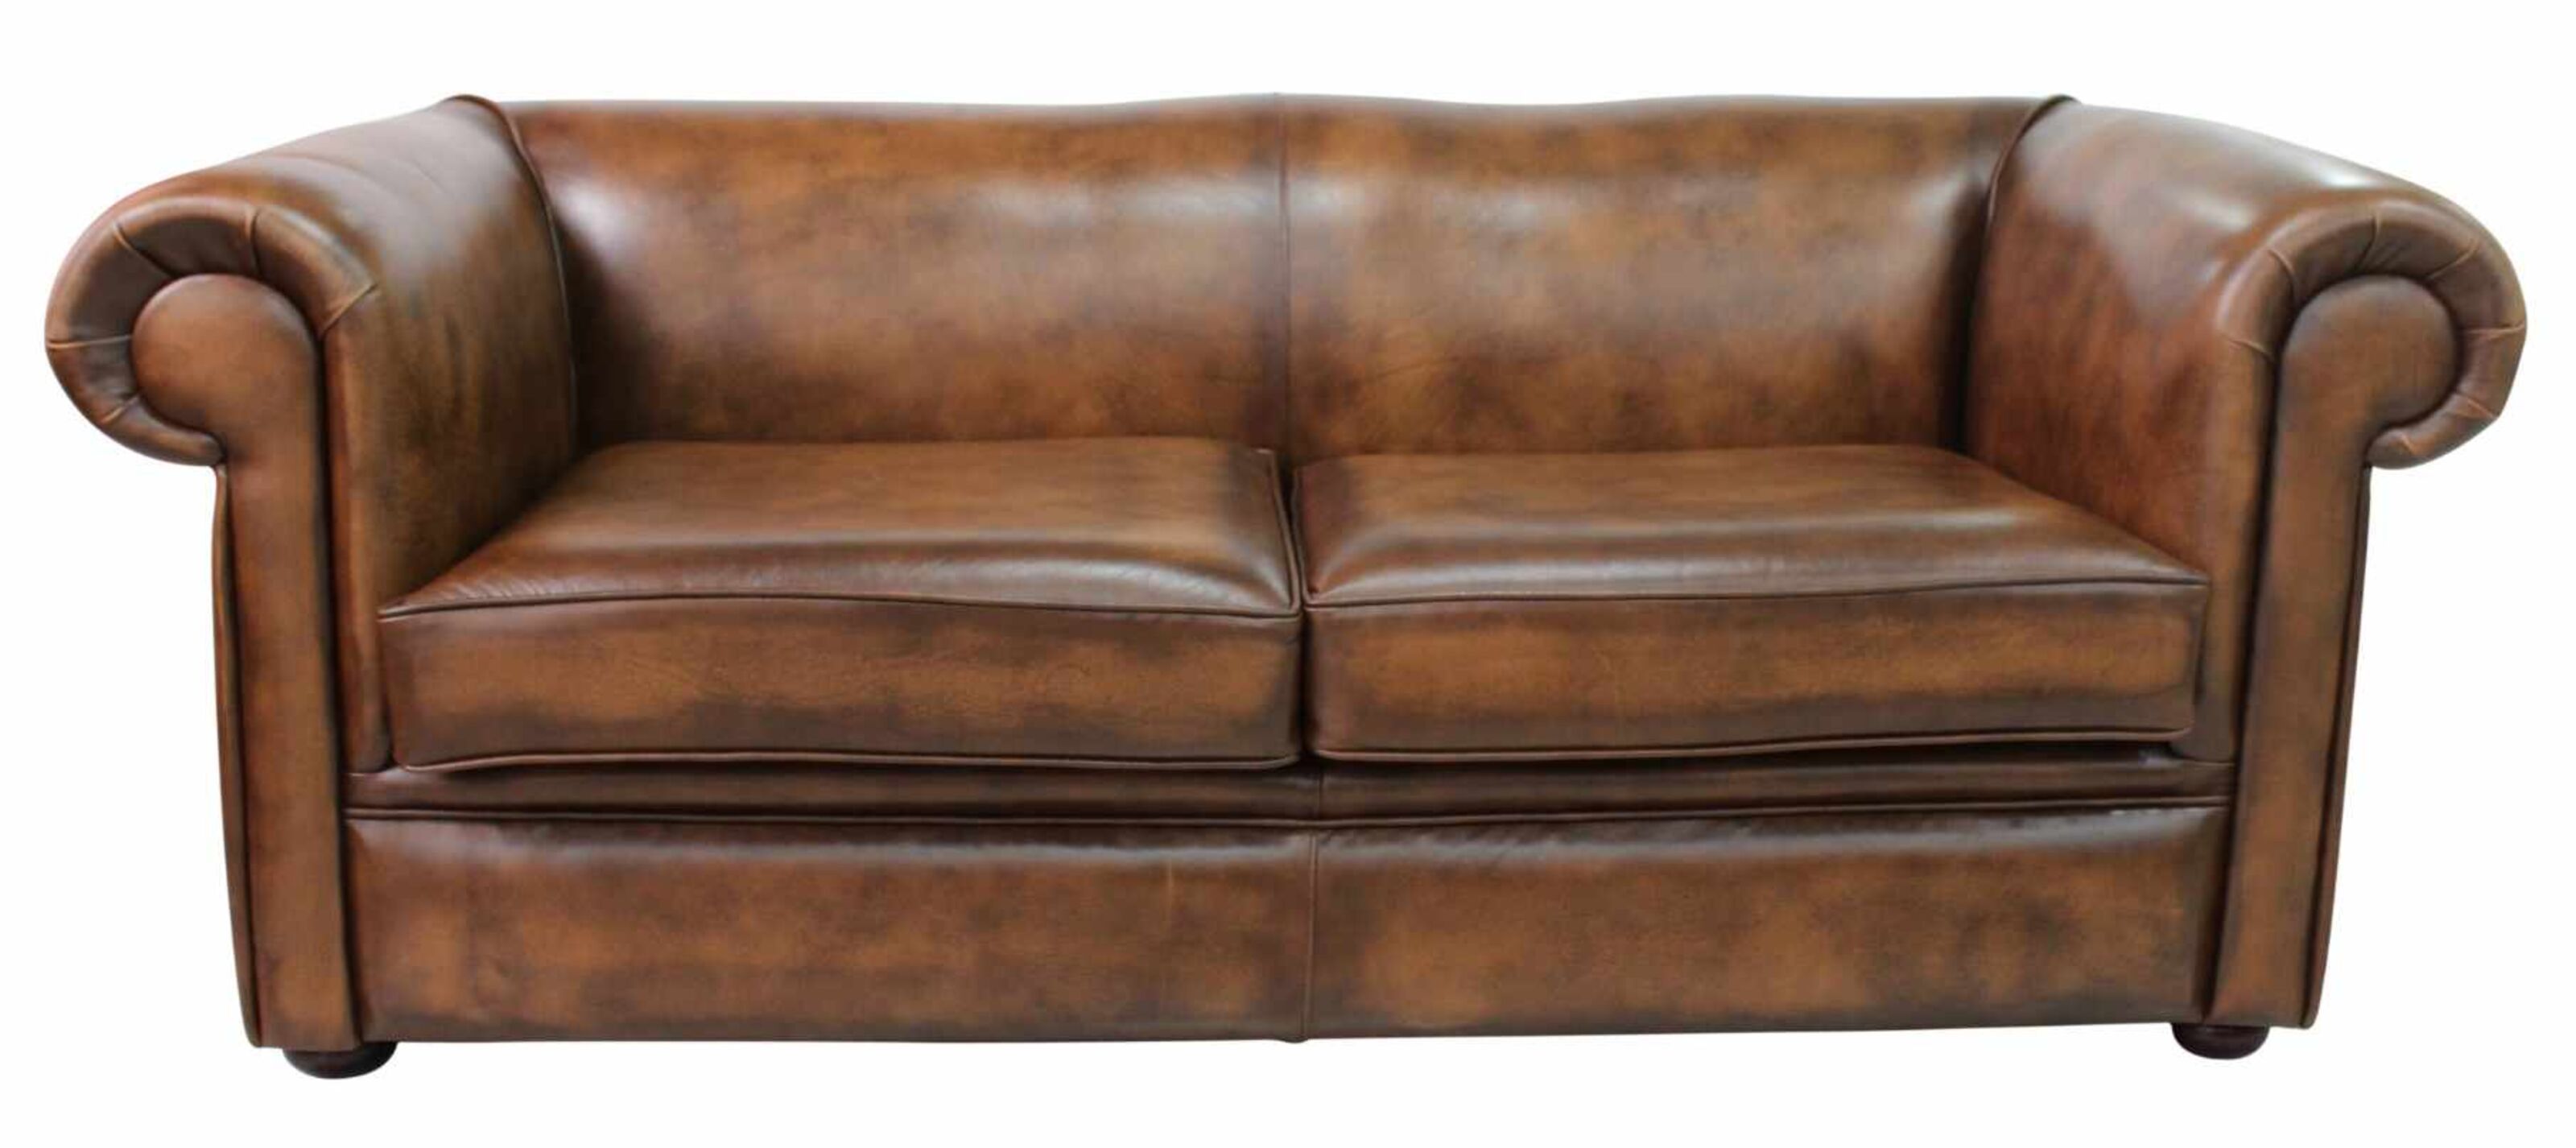 Style North of the Border Discover Chesterfield Sofas in Canada  %Post Title